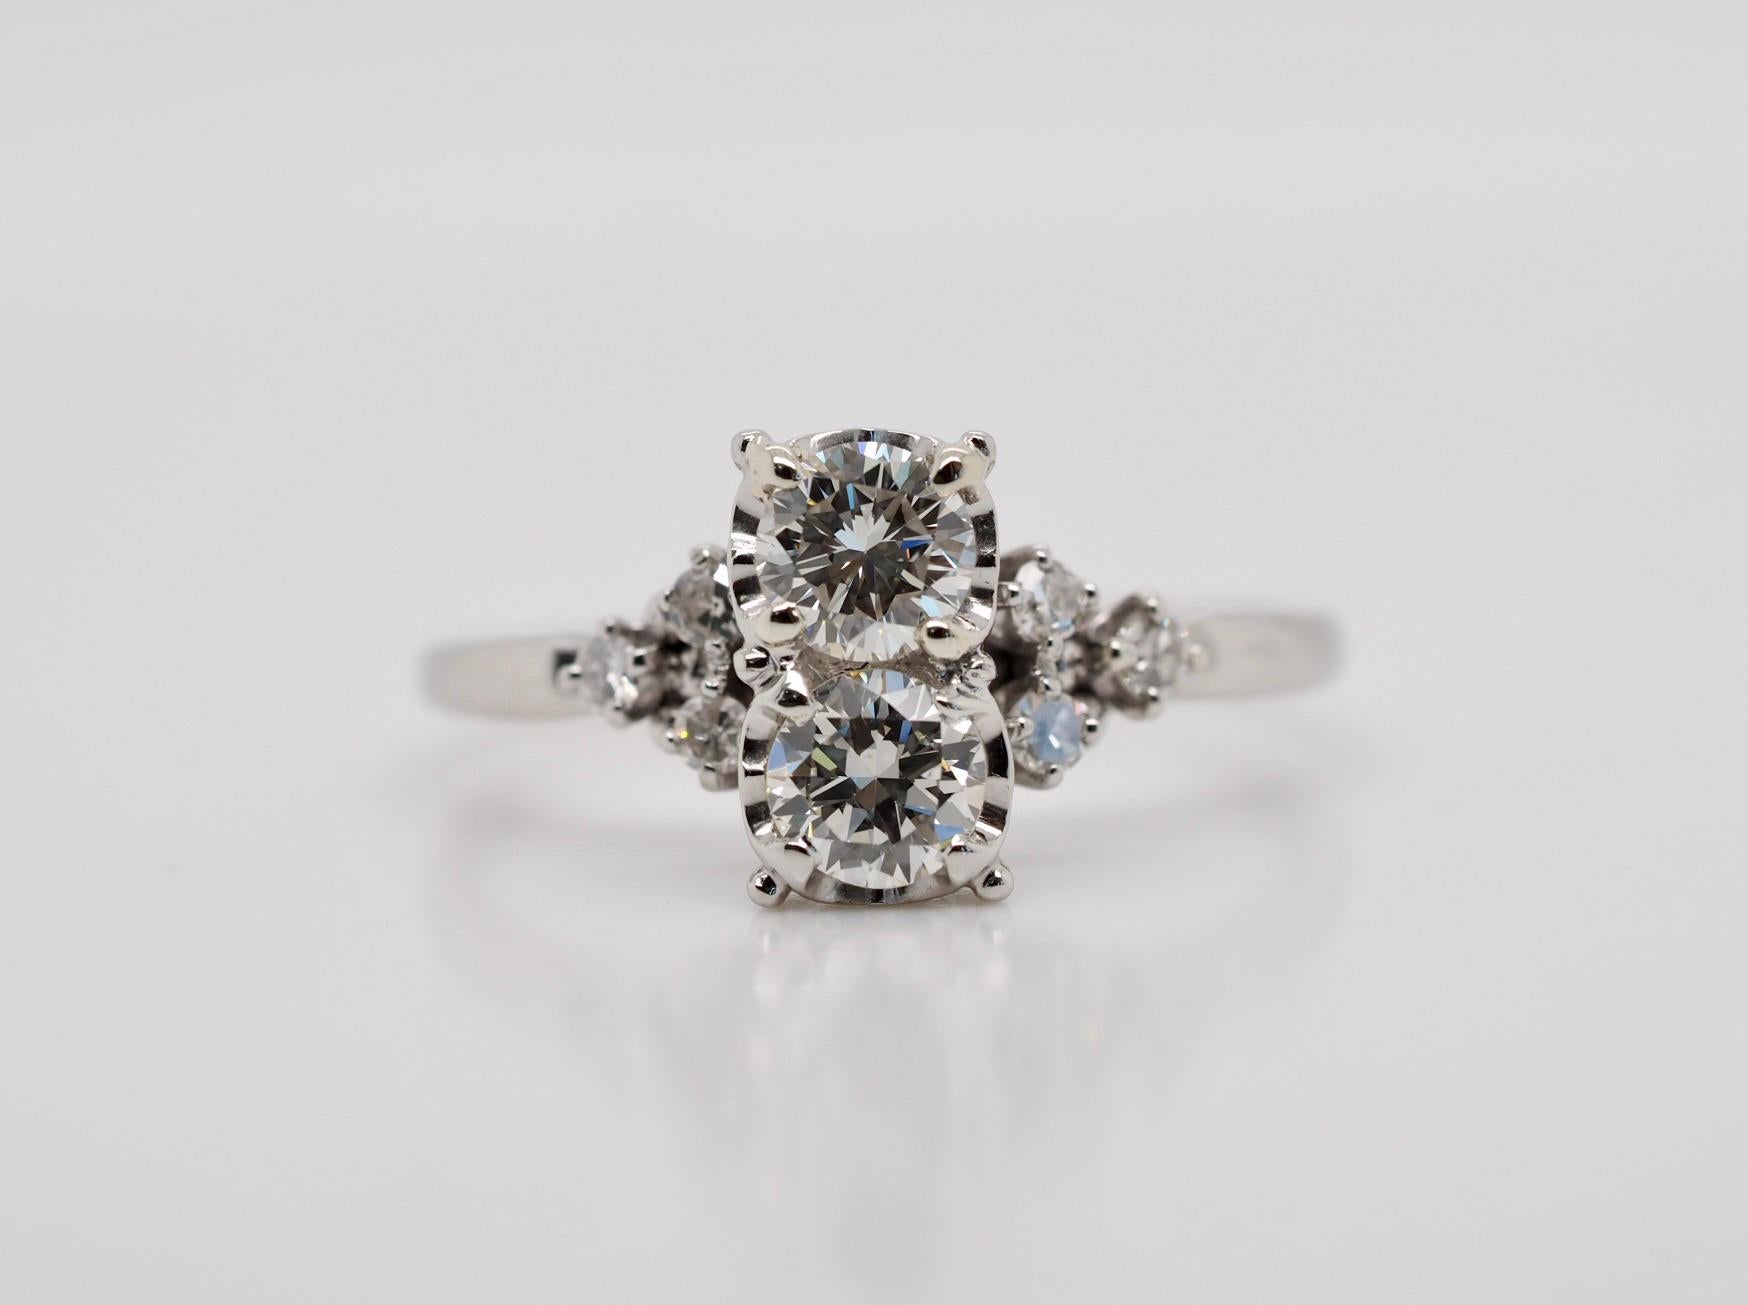 This platinum antique ring dates almost one hundred years old and is in excellent condition. The ring includes two round transitional cut diamond centers 0.80 carat total weight measuring 4.7mm each. Color H, clarity VS. There are three round